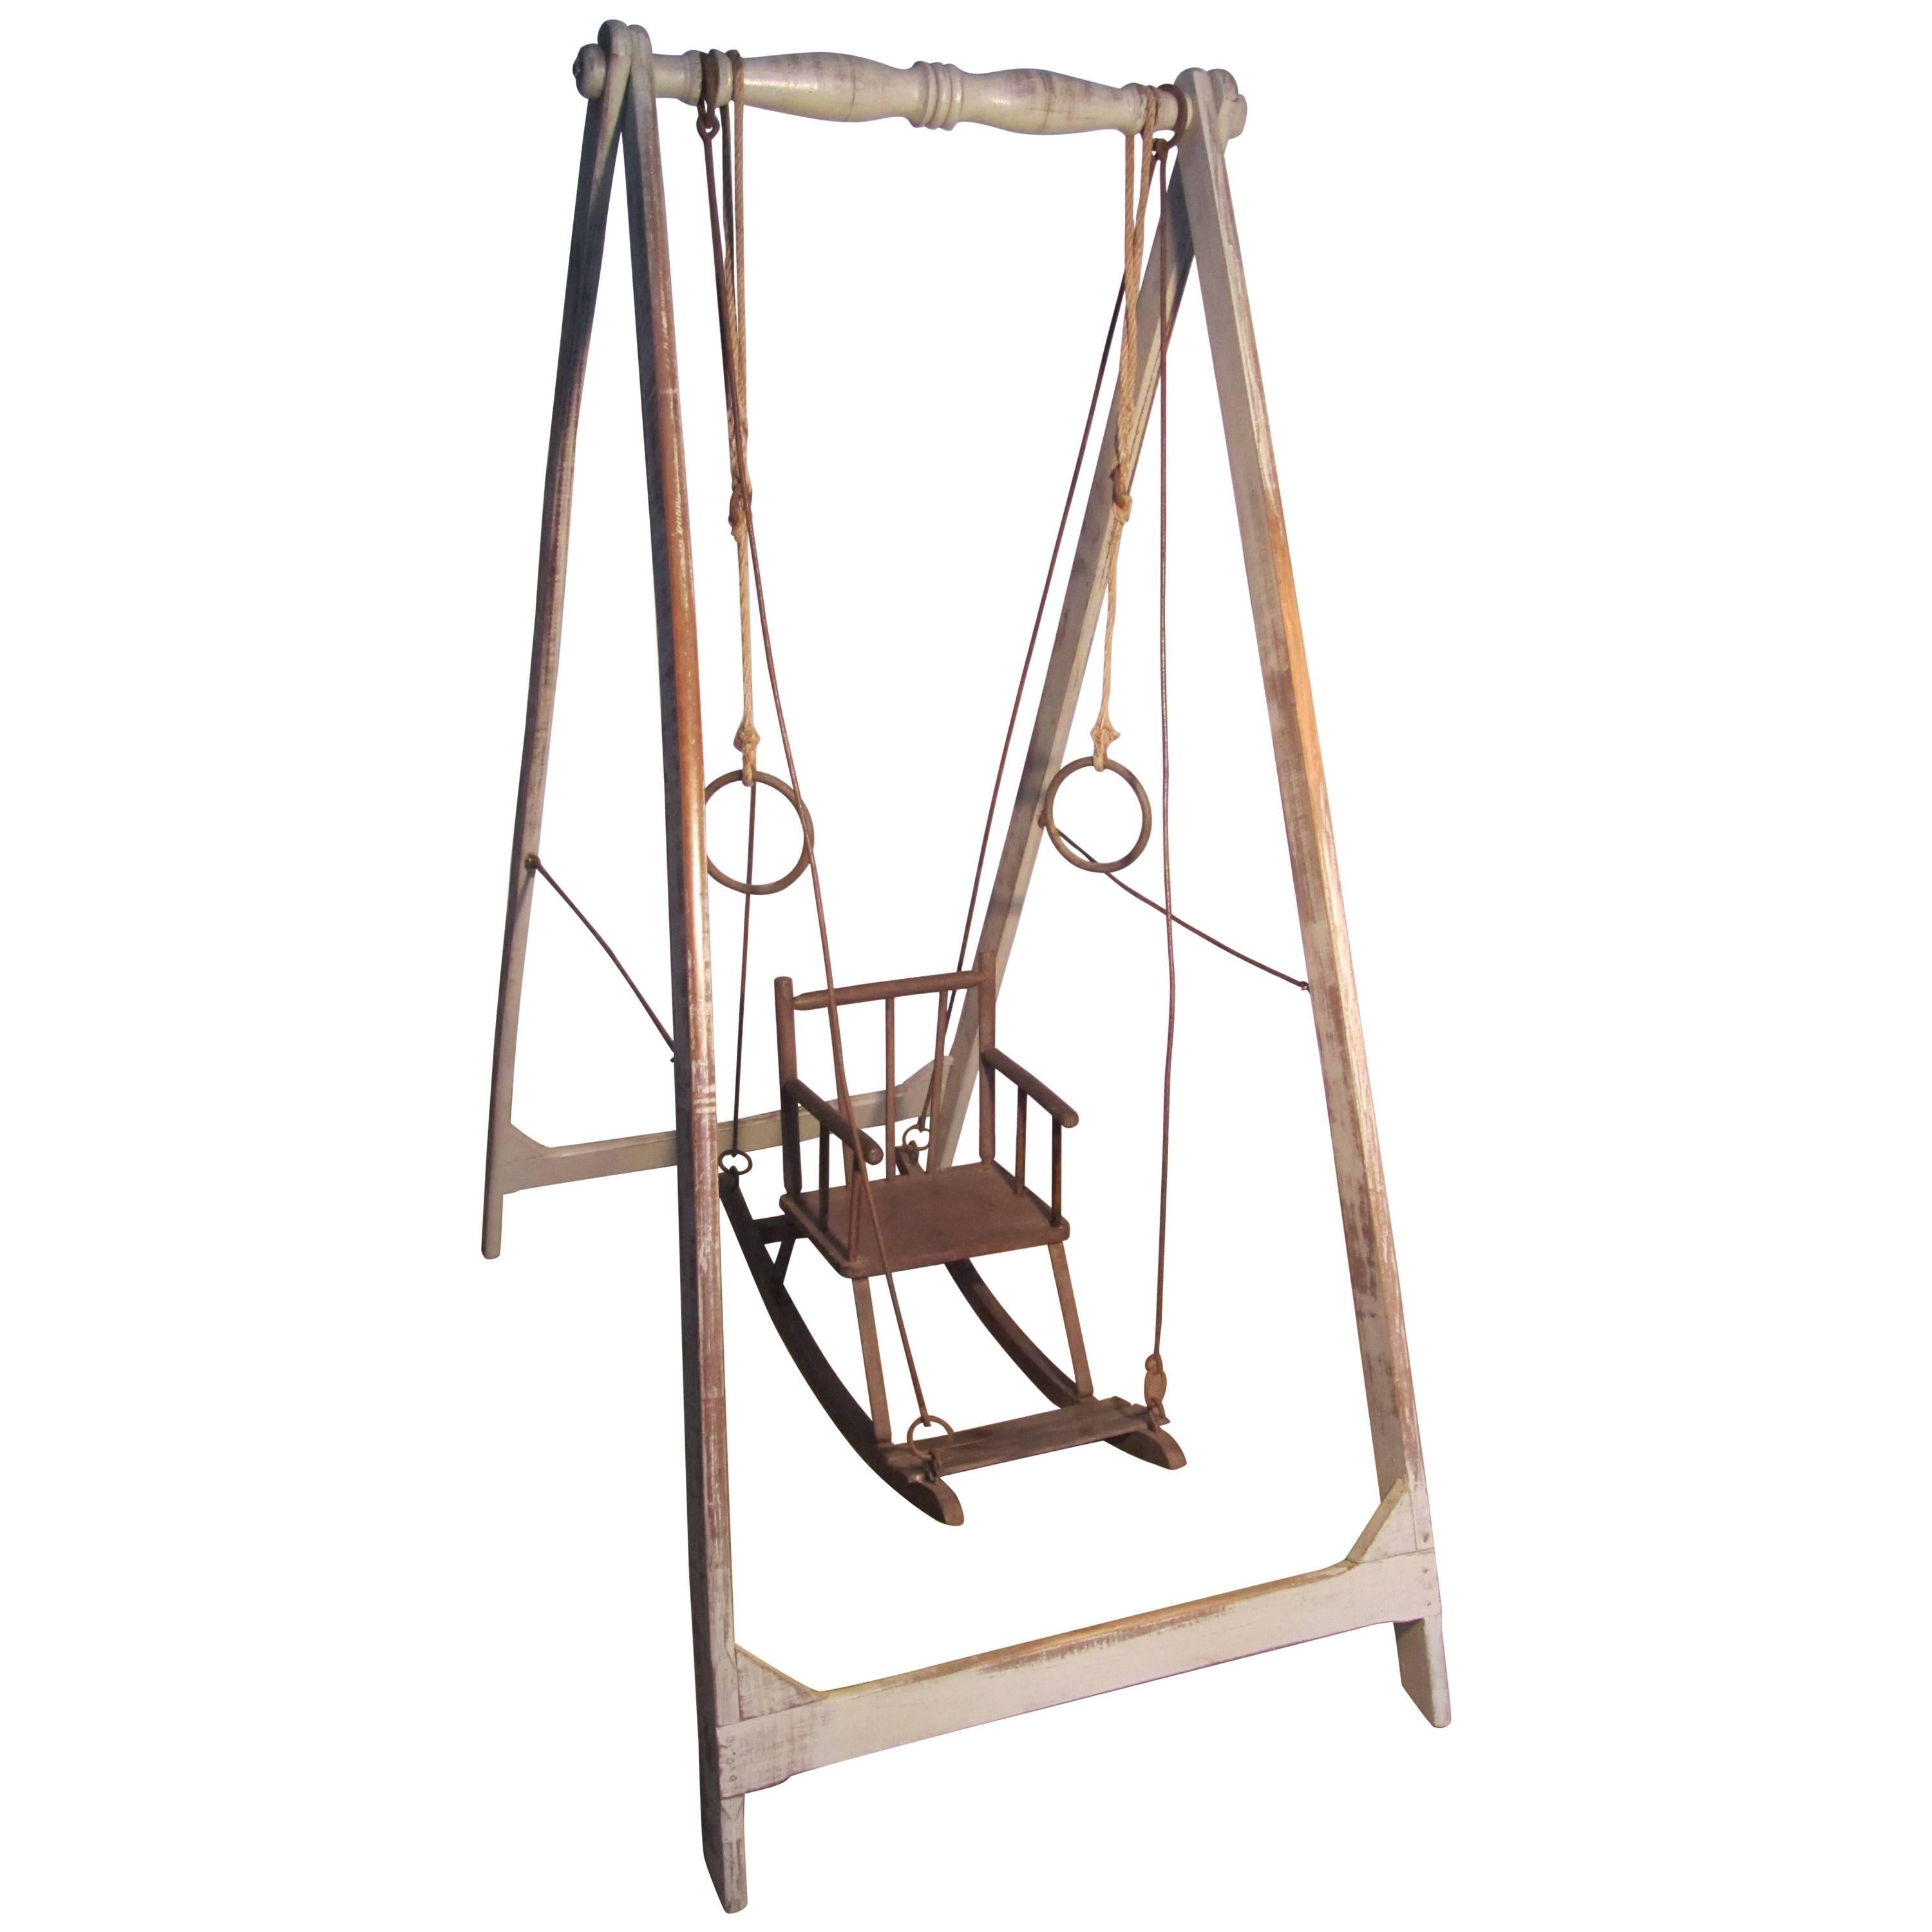 Early 19th Century, French Child's Wooden Swing